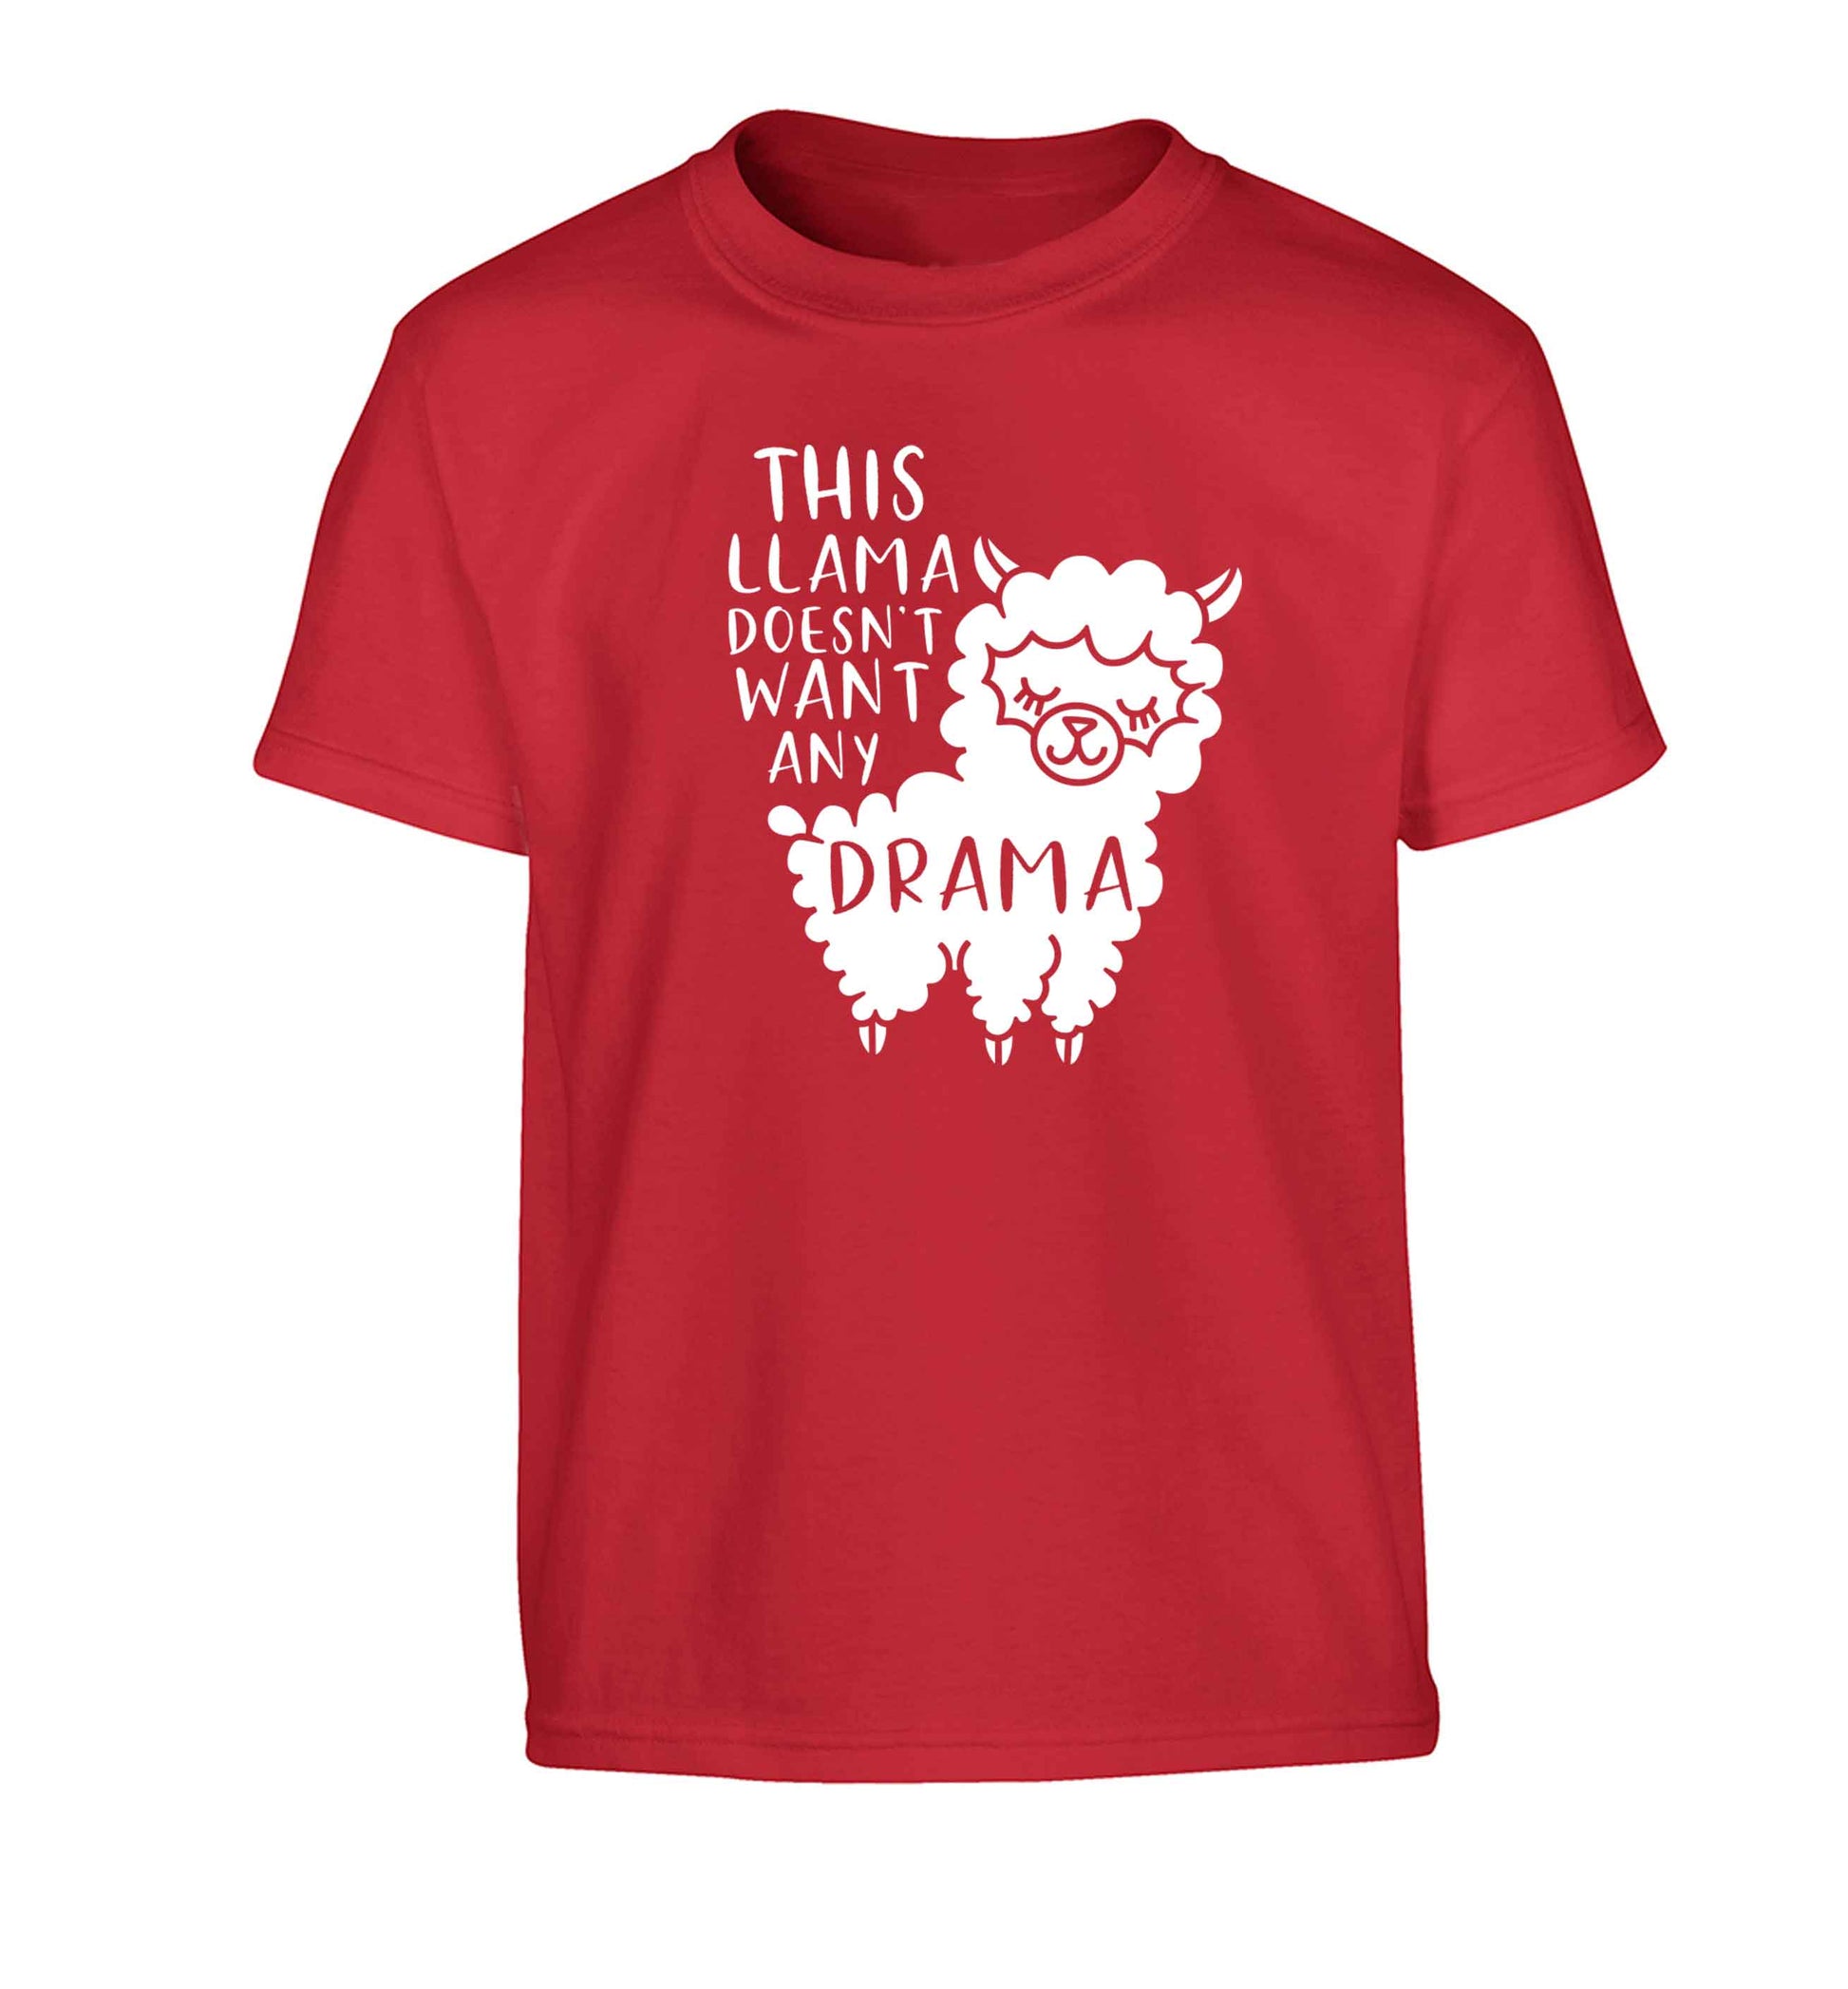 This Llama doesn't want any drama Children's red Tshirt 12-13 Years